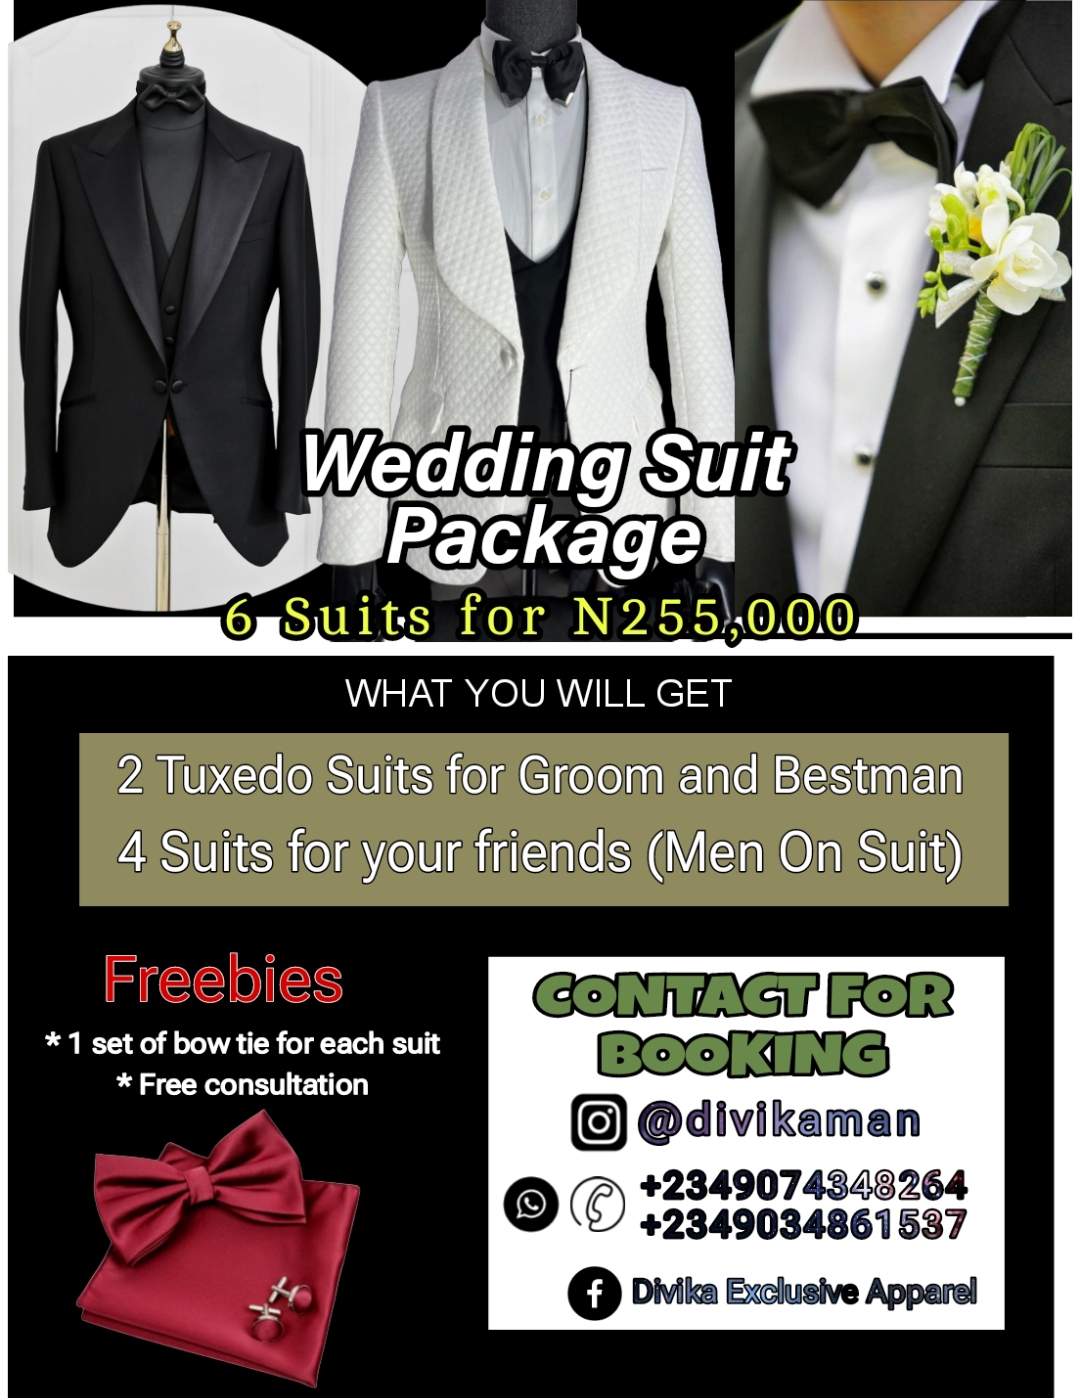 Divika Hub Rolls Out Mouthwatering Wedding Suit Package